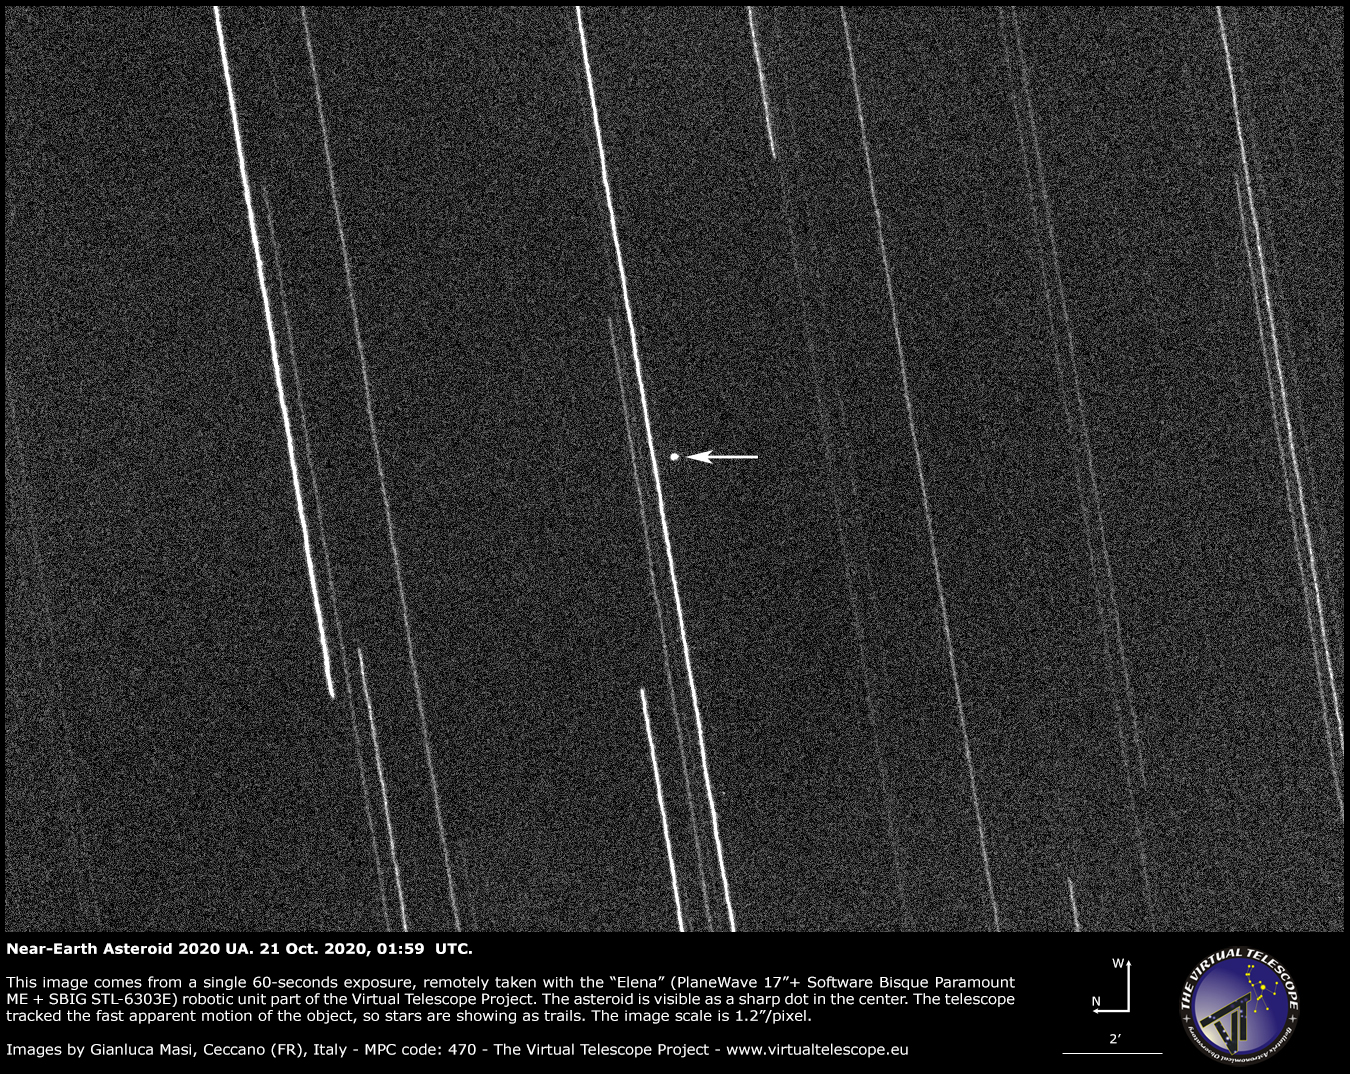 Near-Earth asteroid 2020 UA at its closest to Earth. 21 Oct. 2020.